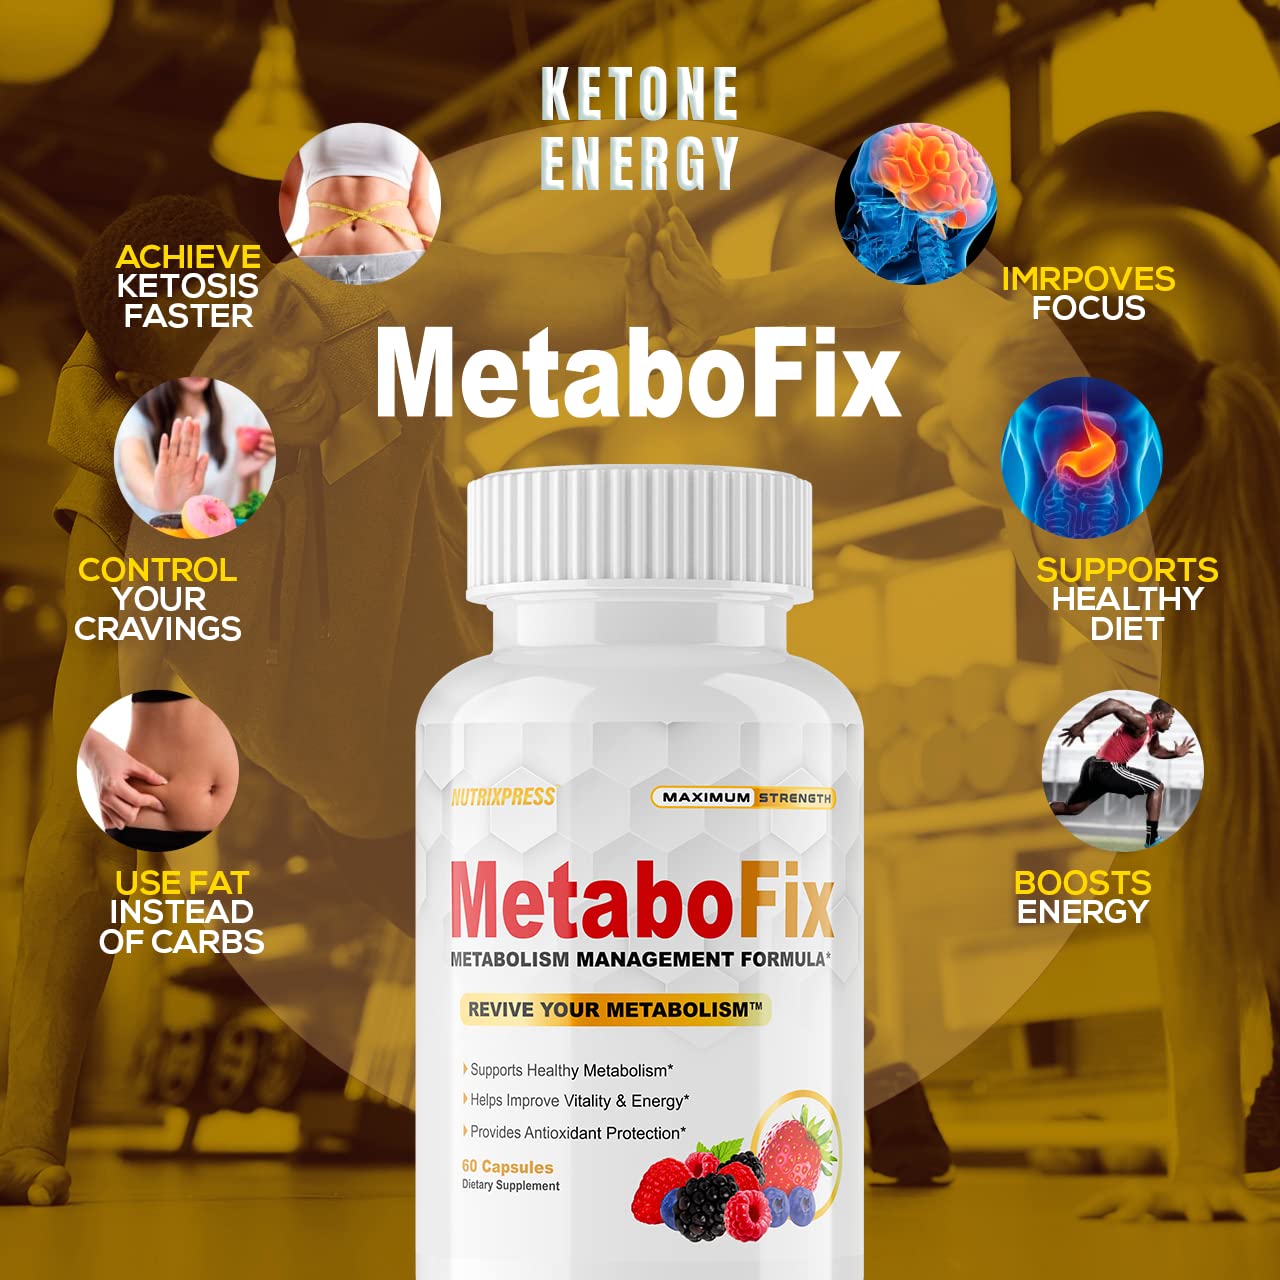 where can I buy metabofix